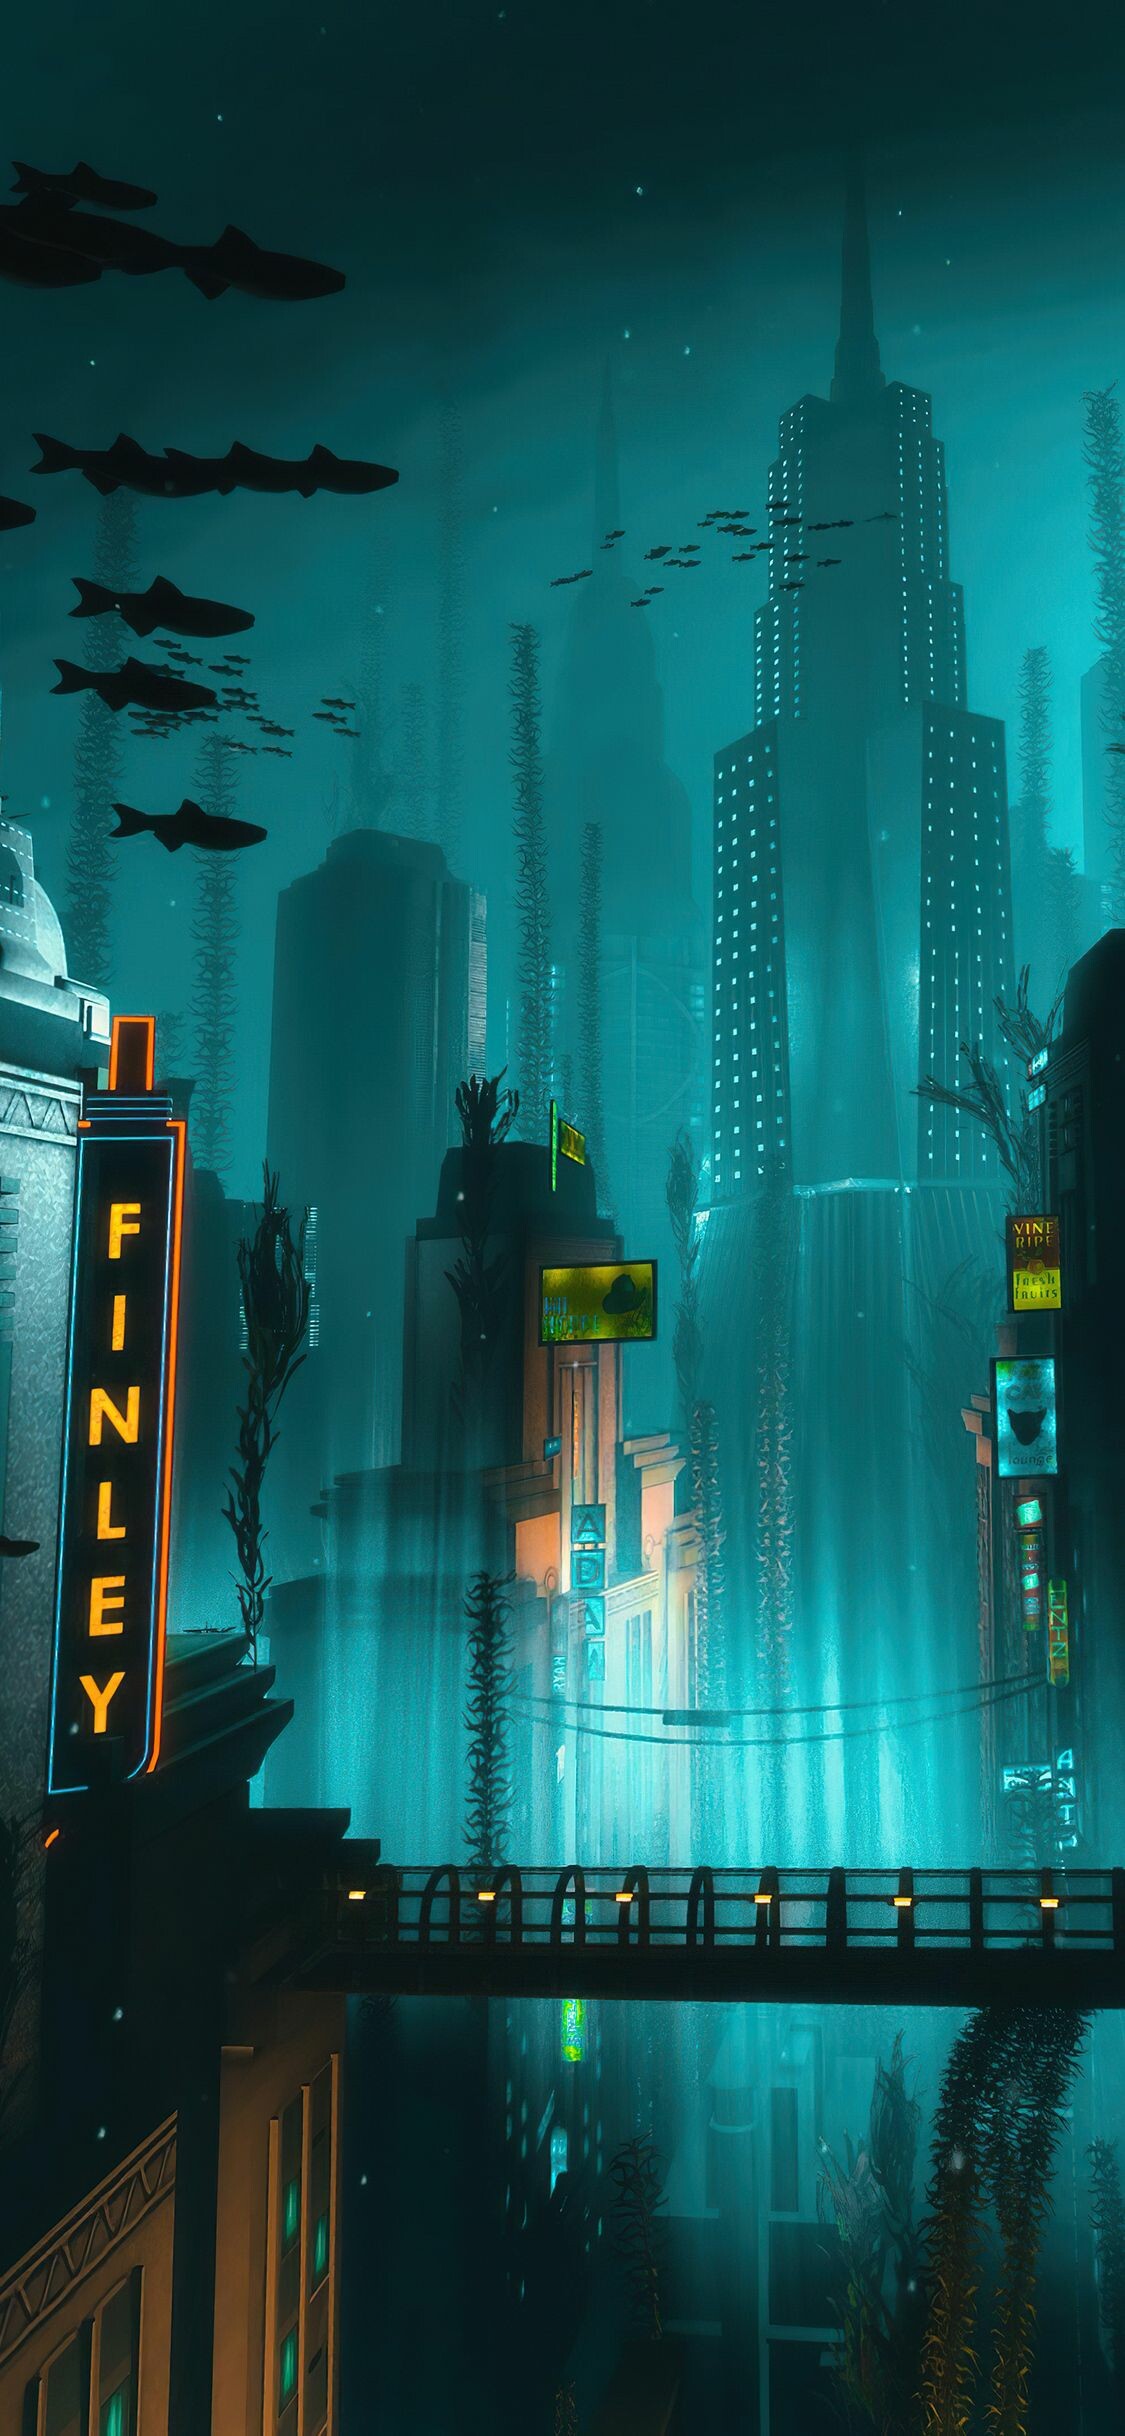 BioShock: The fictional underwater city of Rapture, An underwater city, The main setting. 1130x2440 HD Background.